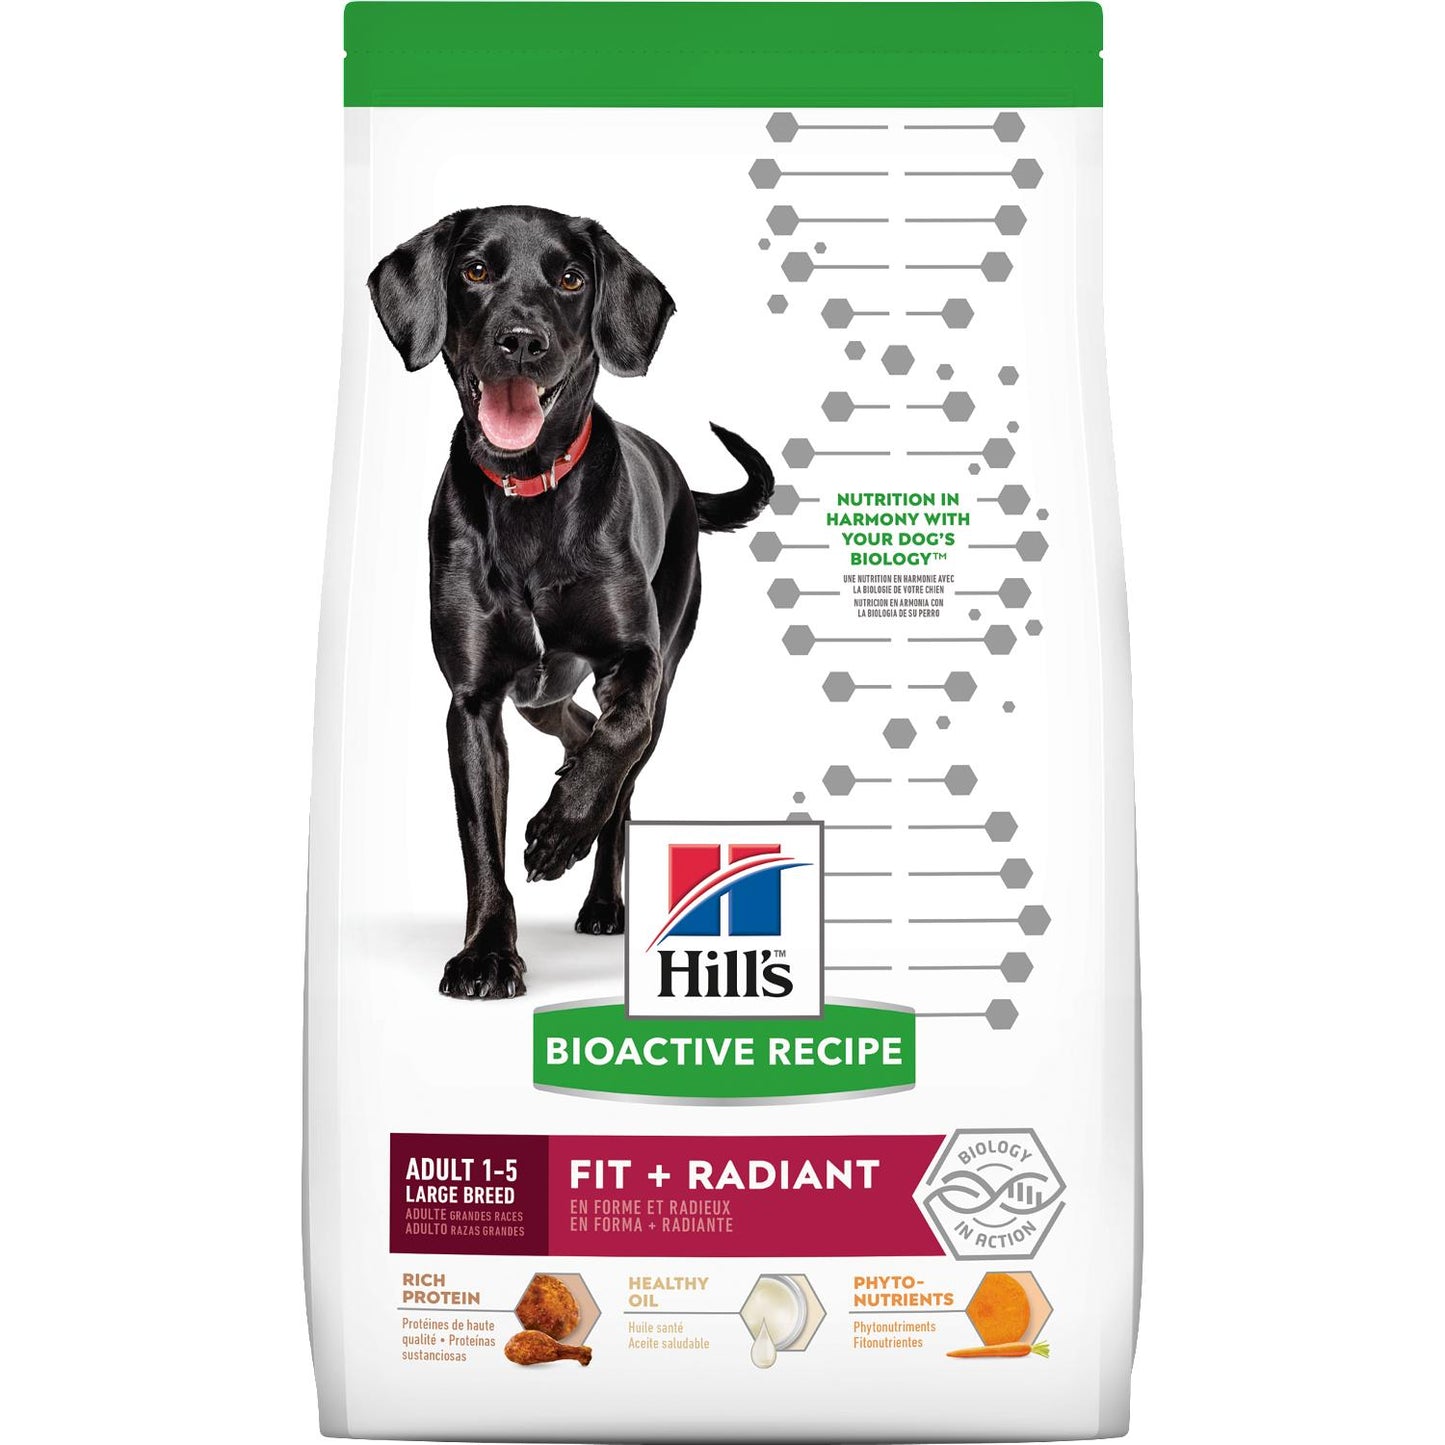 Science Diet Dog Food Bioactive Recipe Adult Large Breed Fit + Radiant 22.5 LB